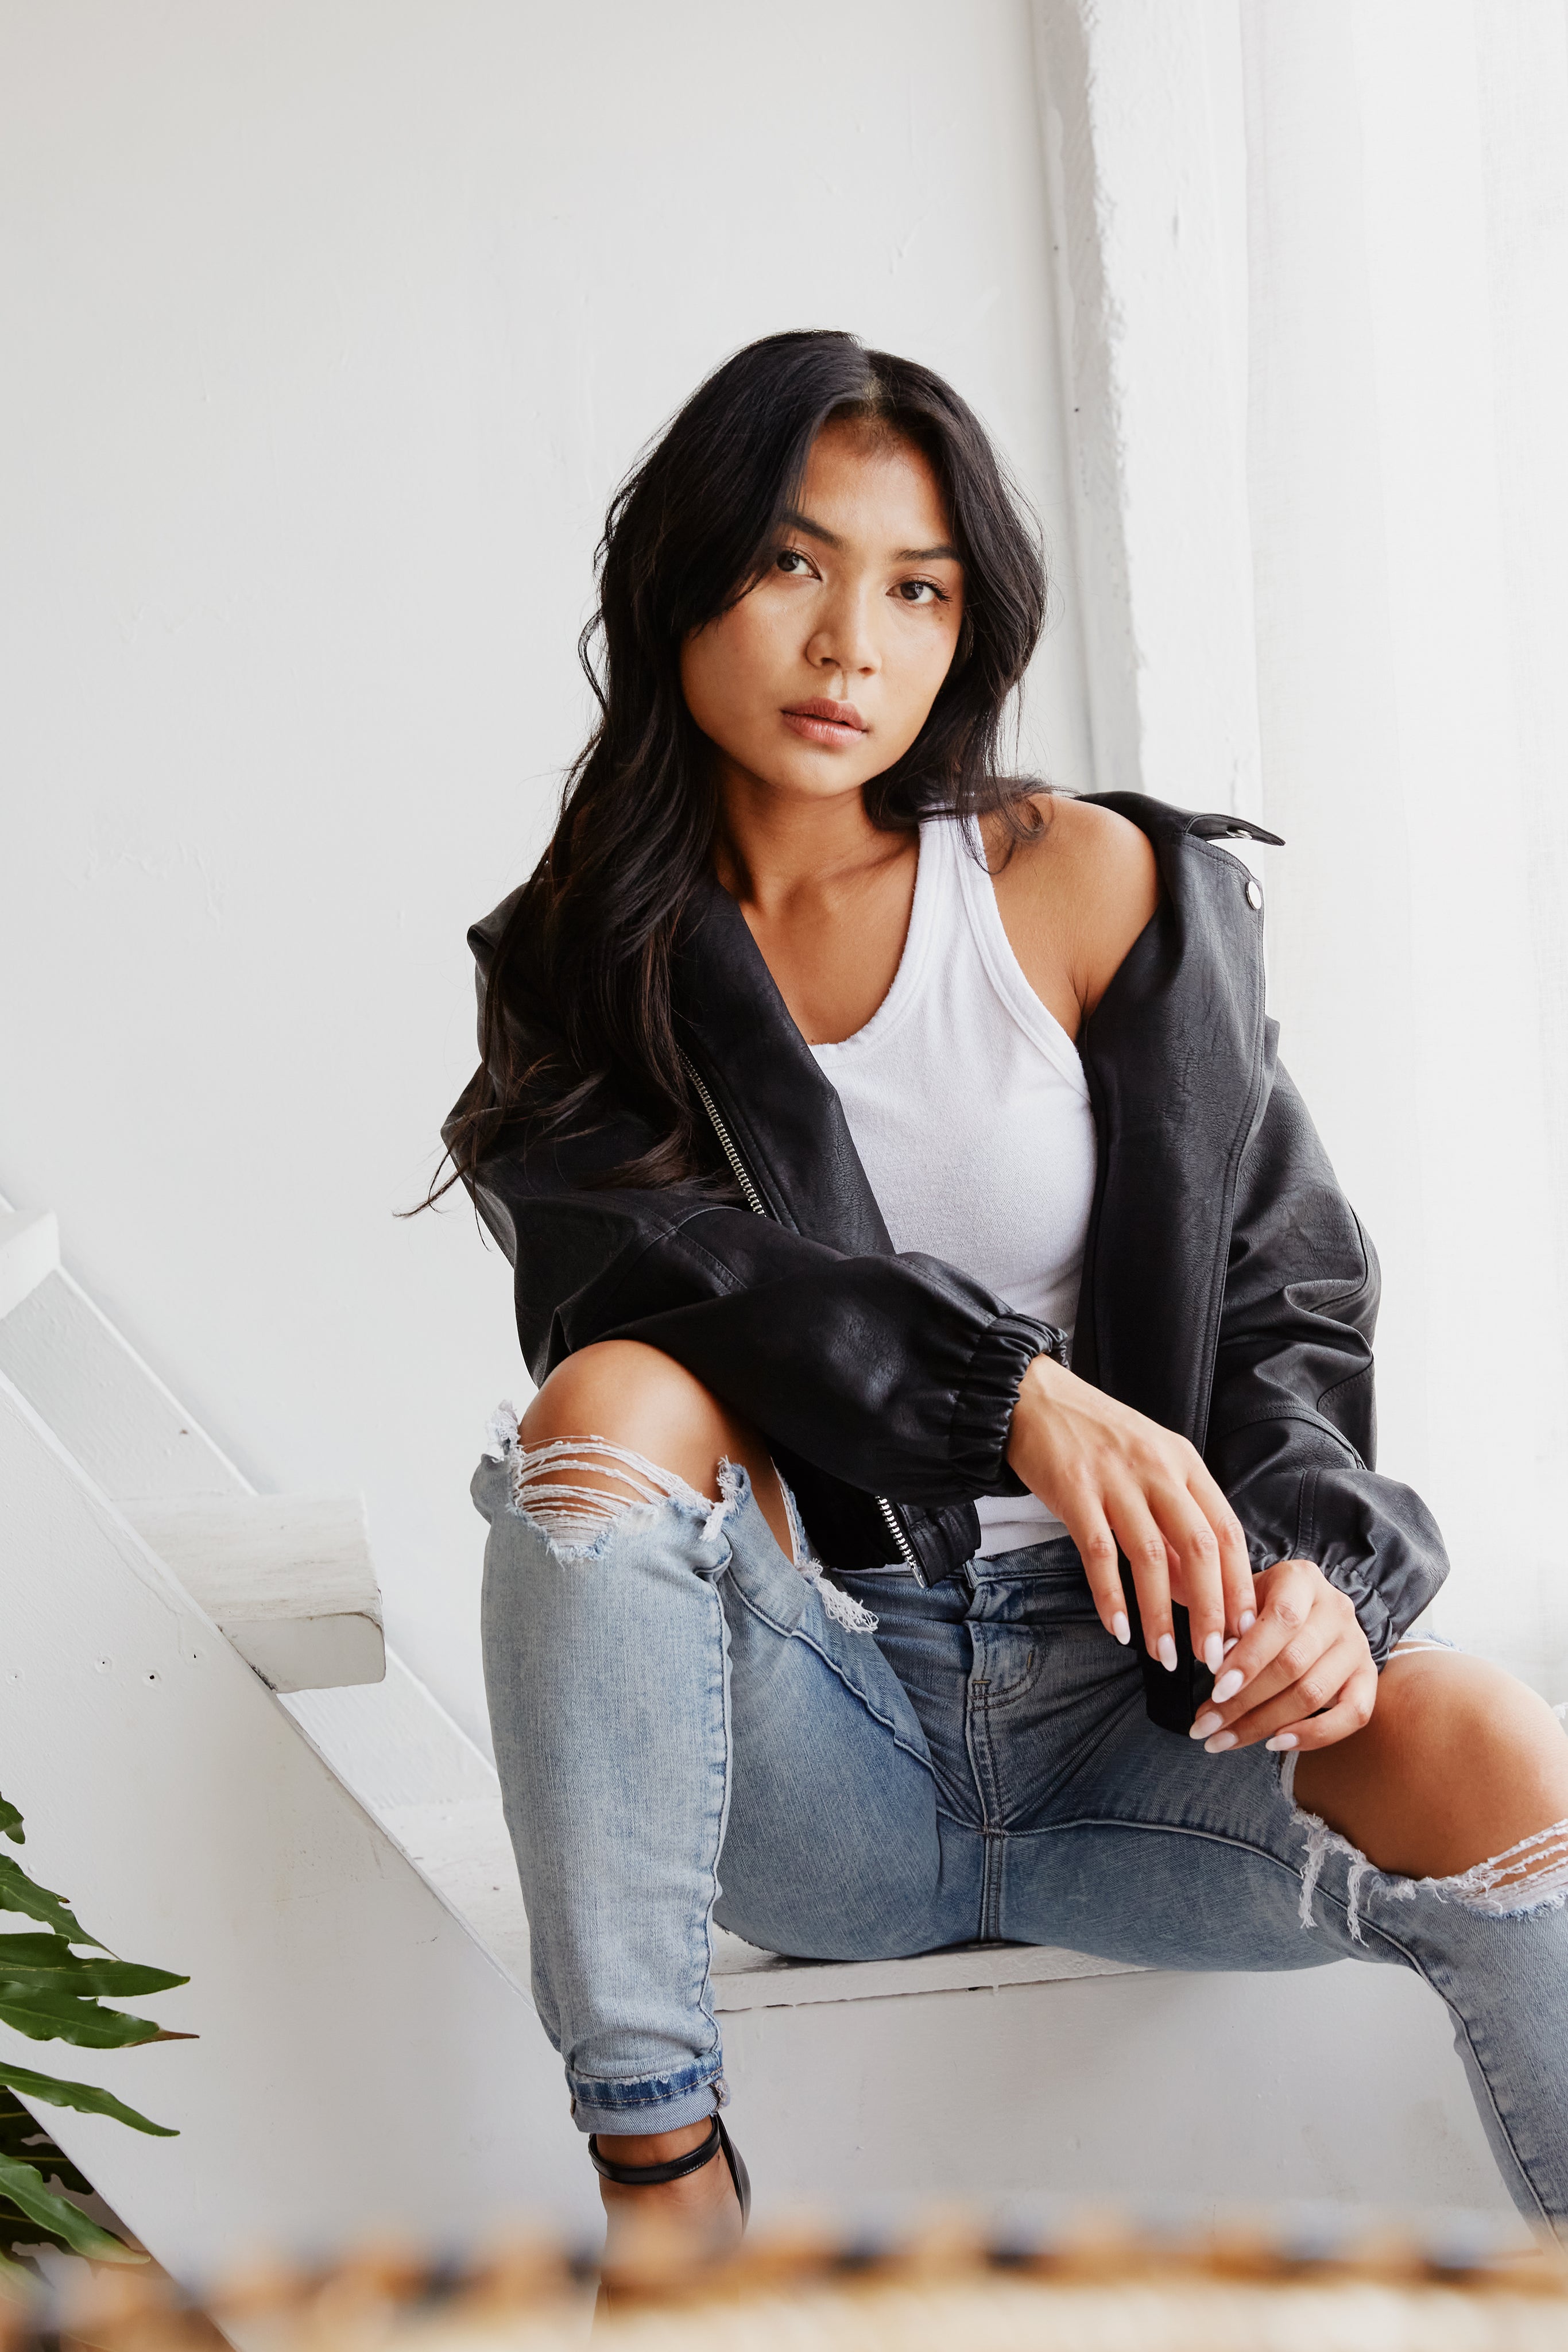 files/posing-in-denim-and-leather.jpg